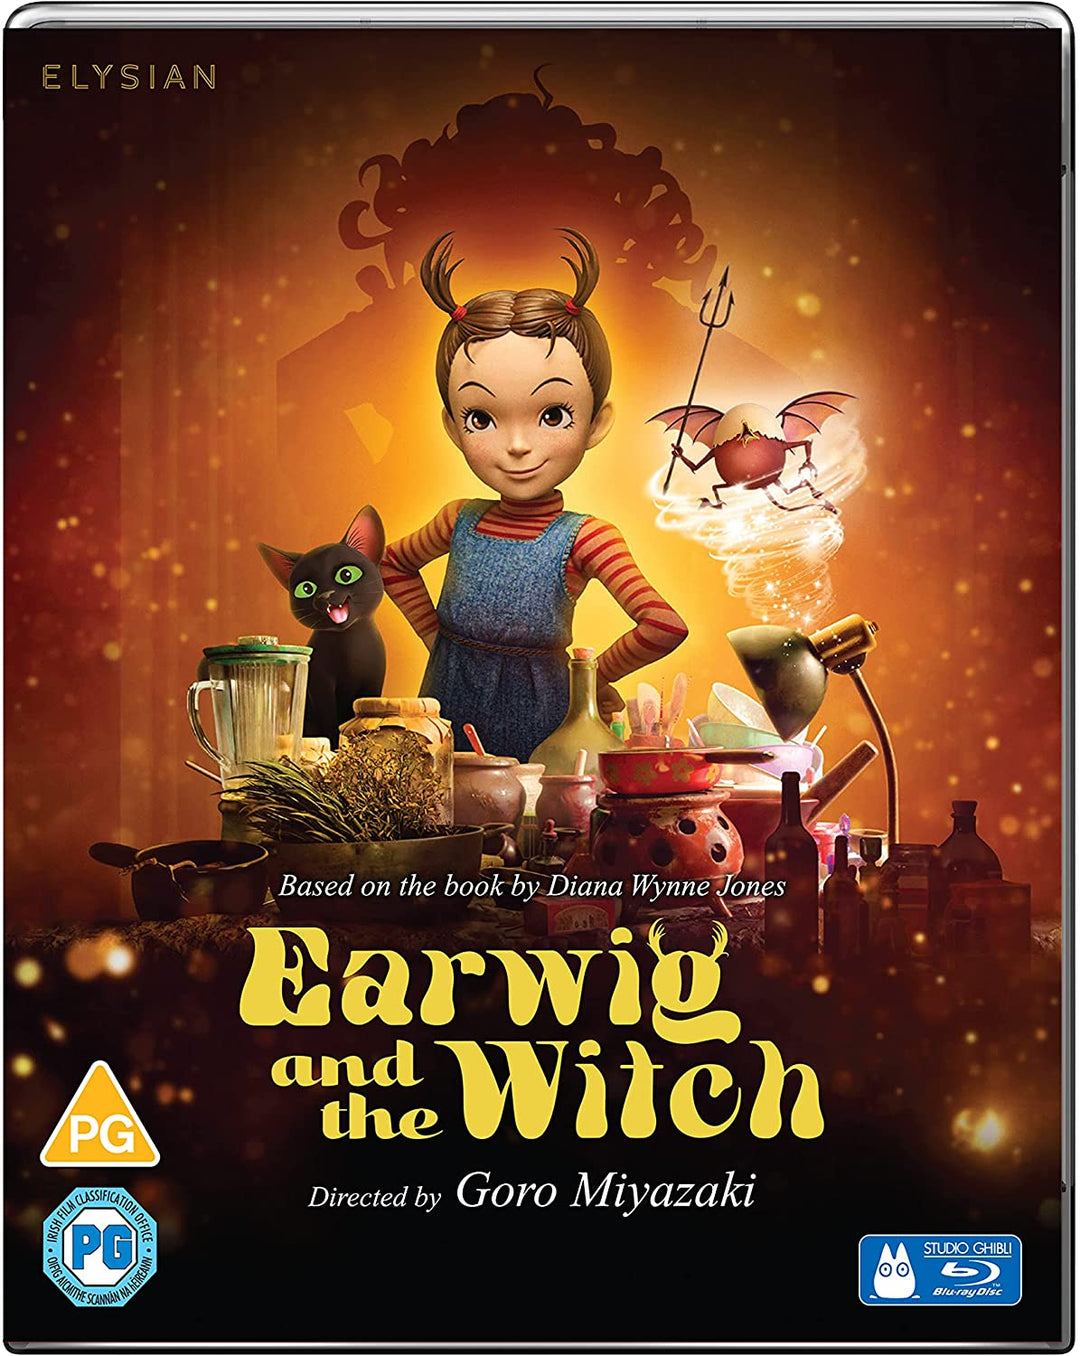 Earwig And The Witch – Fantasy/Anime [Blu-ray]